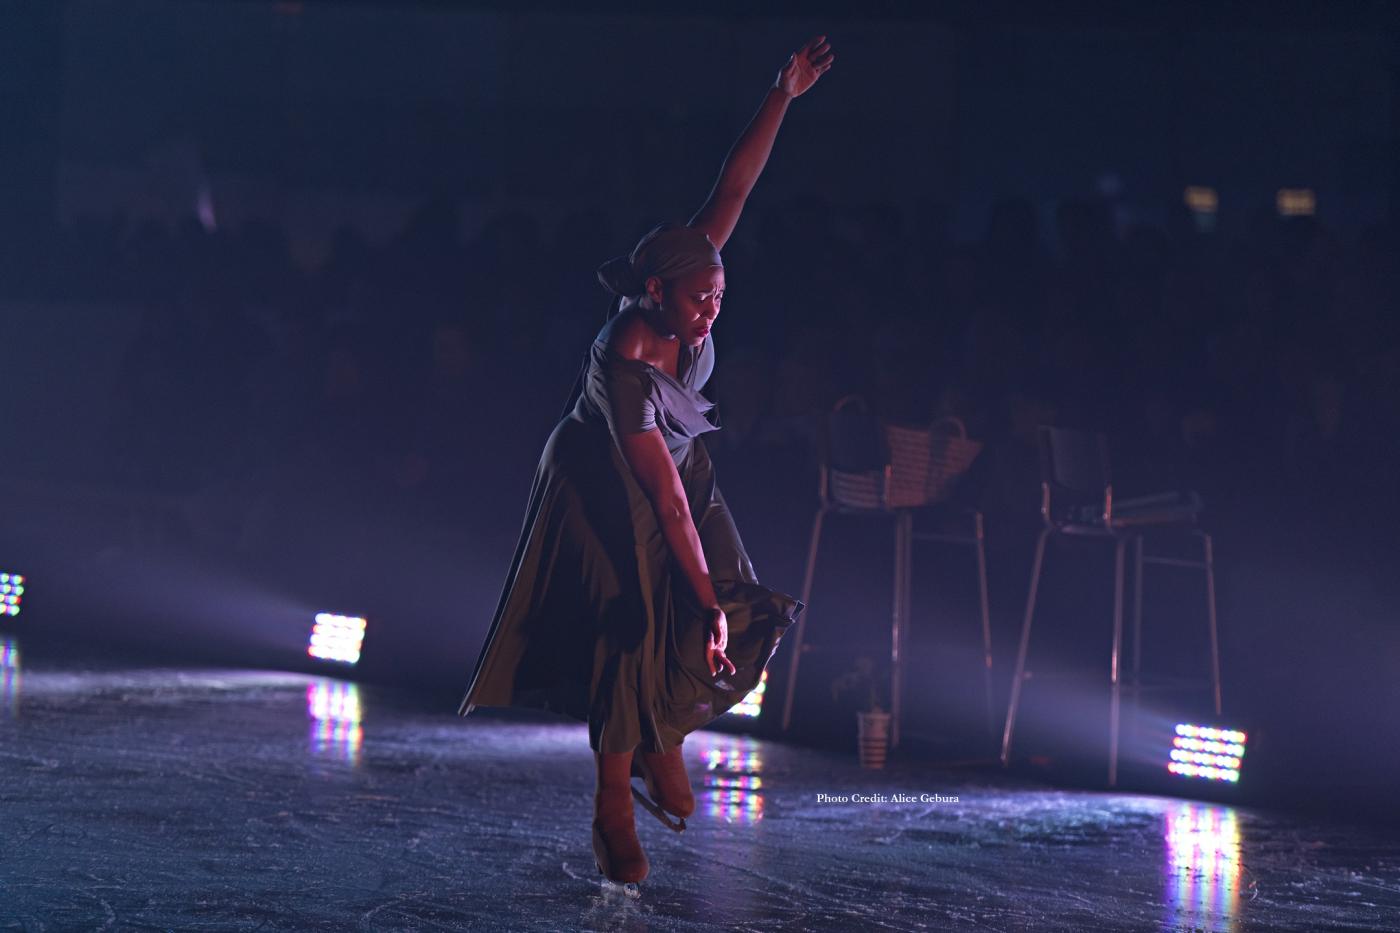 A Black ice skater holds her arms up and down.